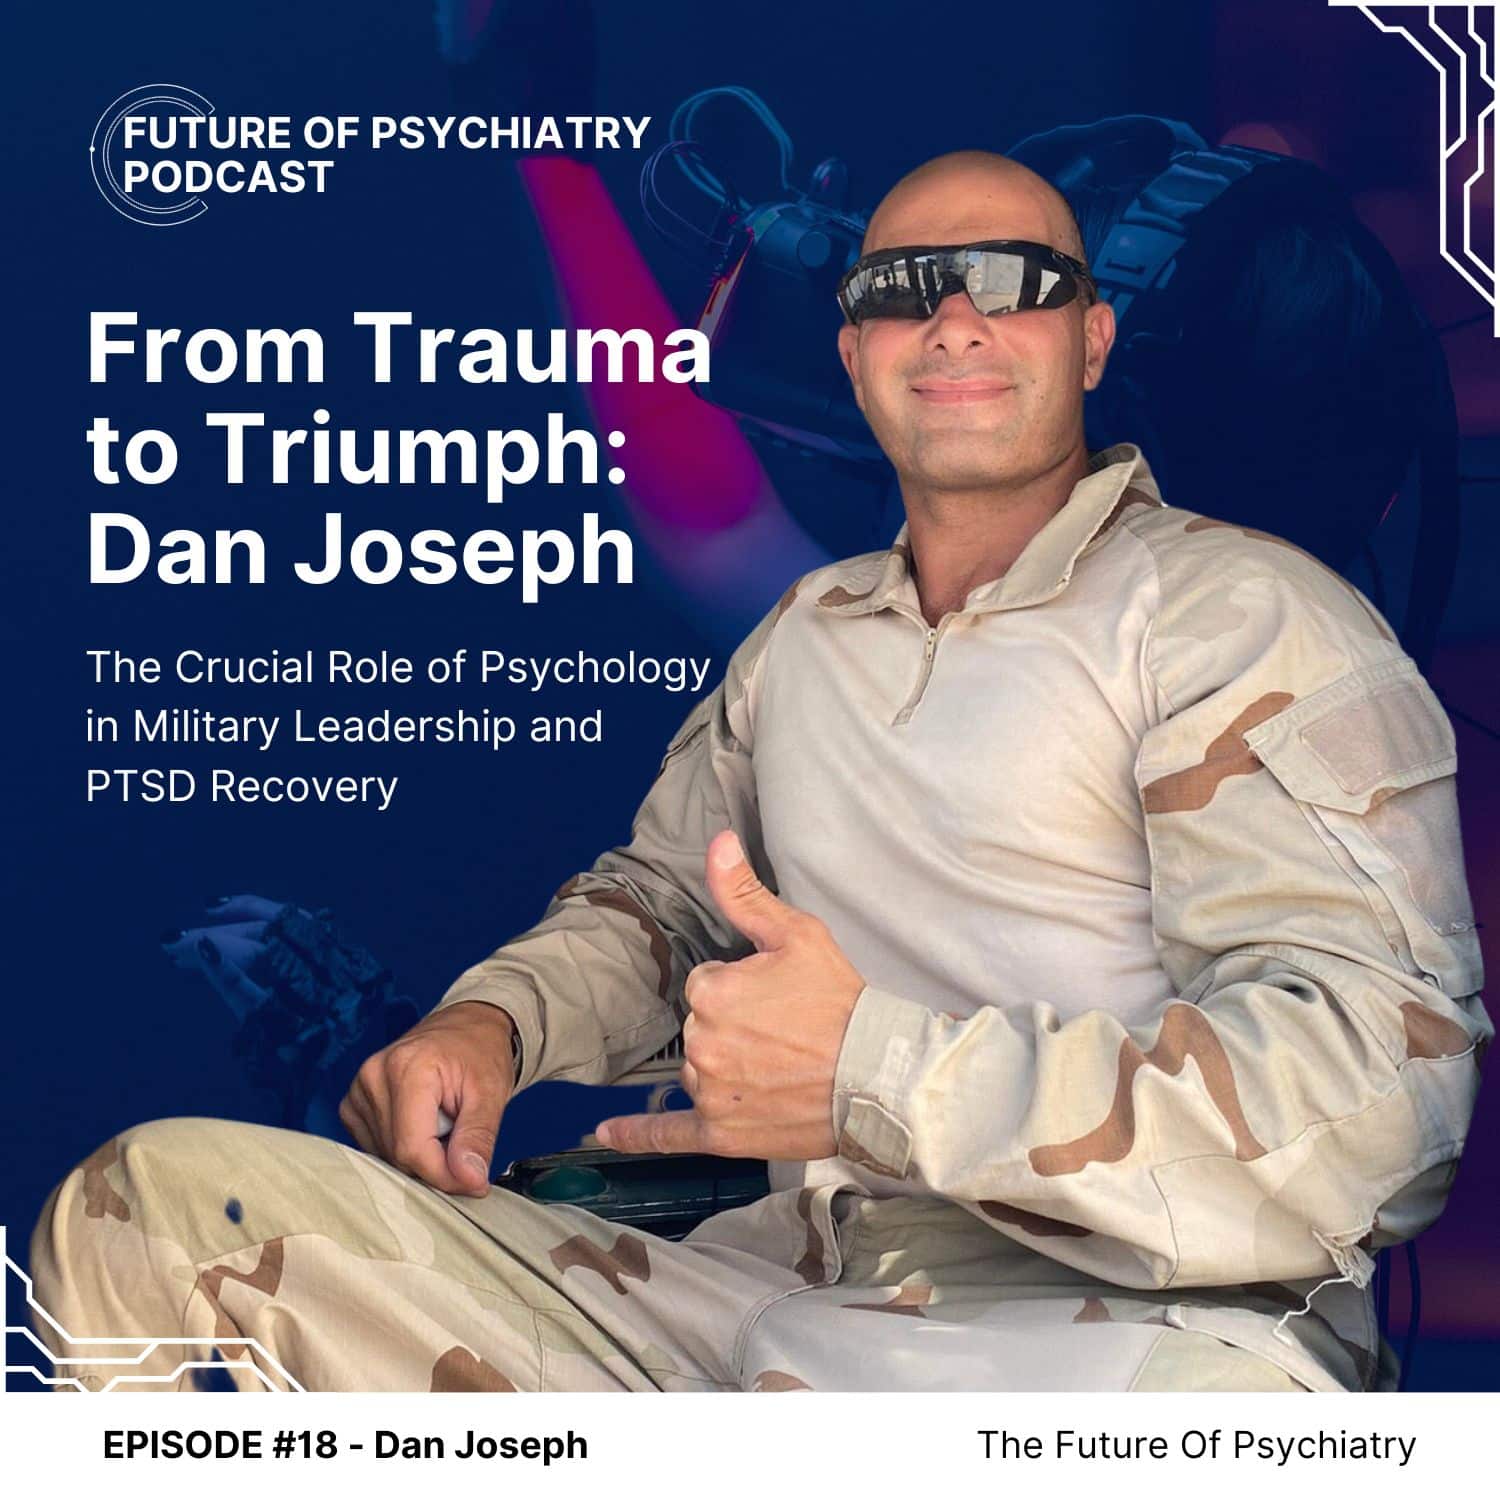 From Trauma To Triumph: The Crucial Role of Psychology in Military Leadership and PTSD Recovery 